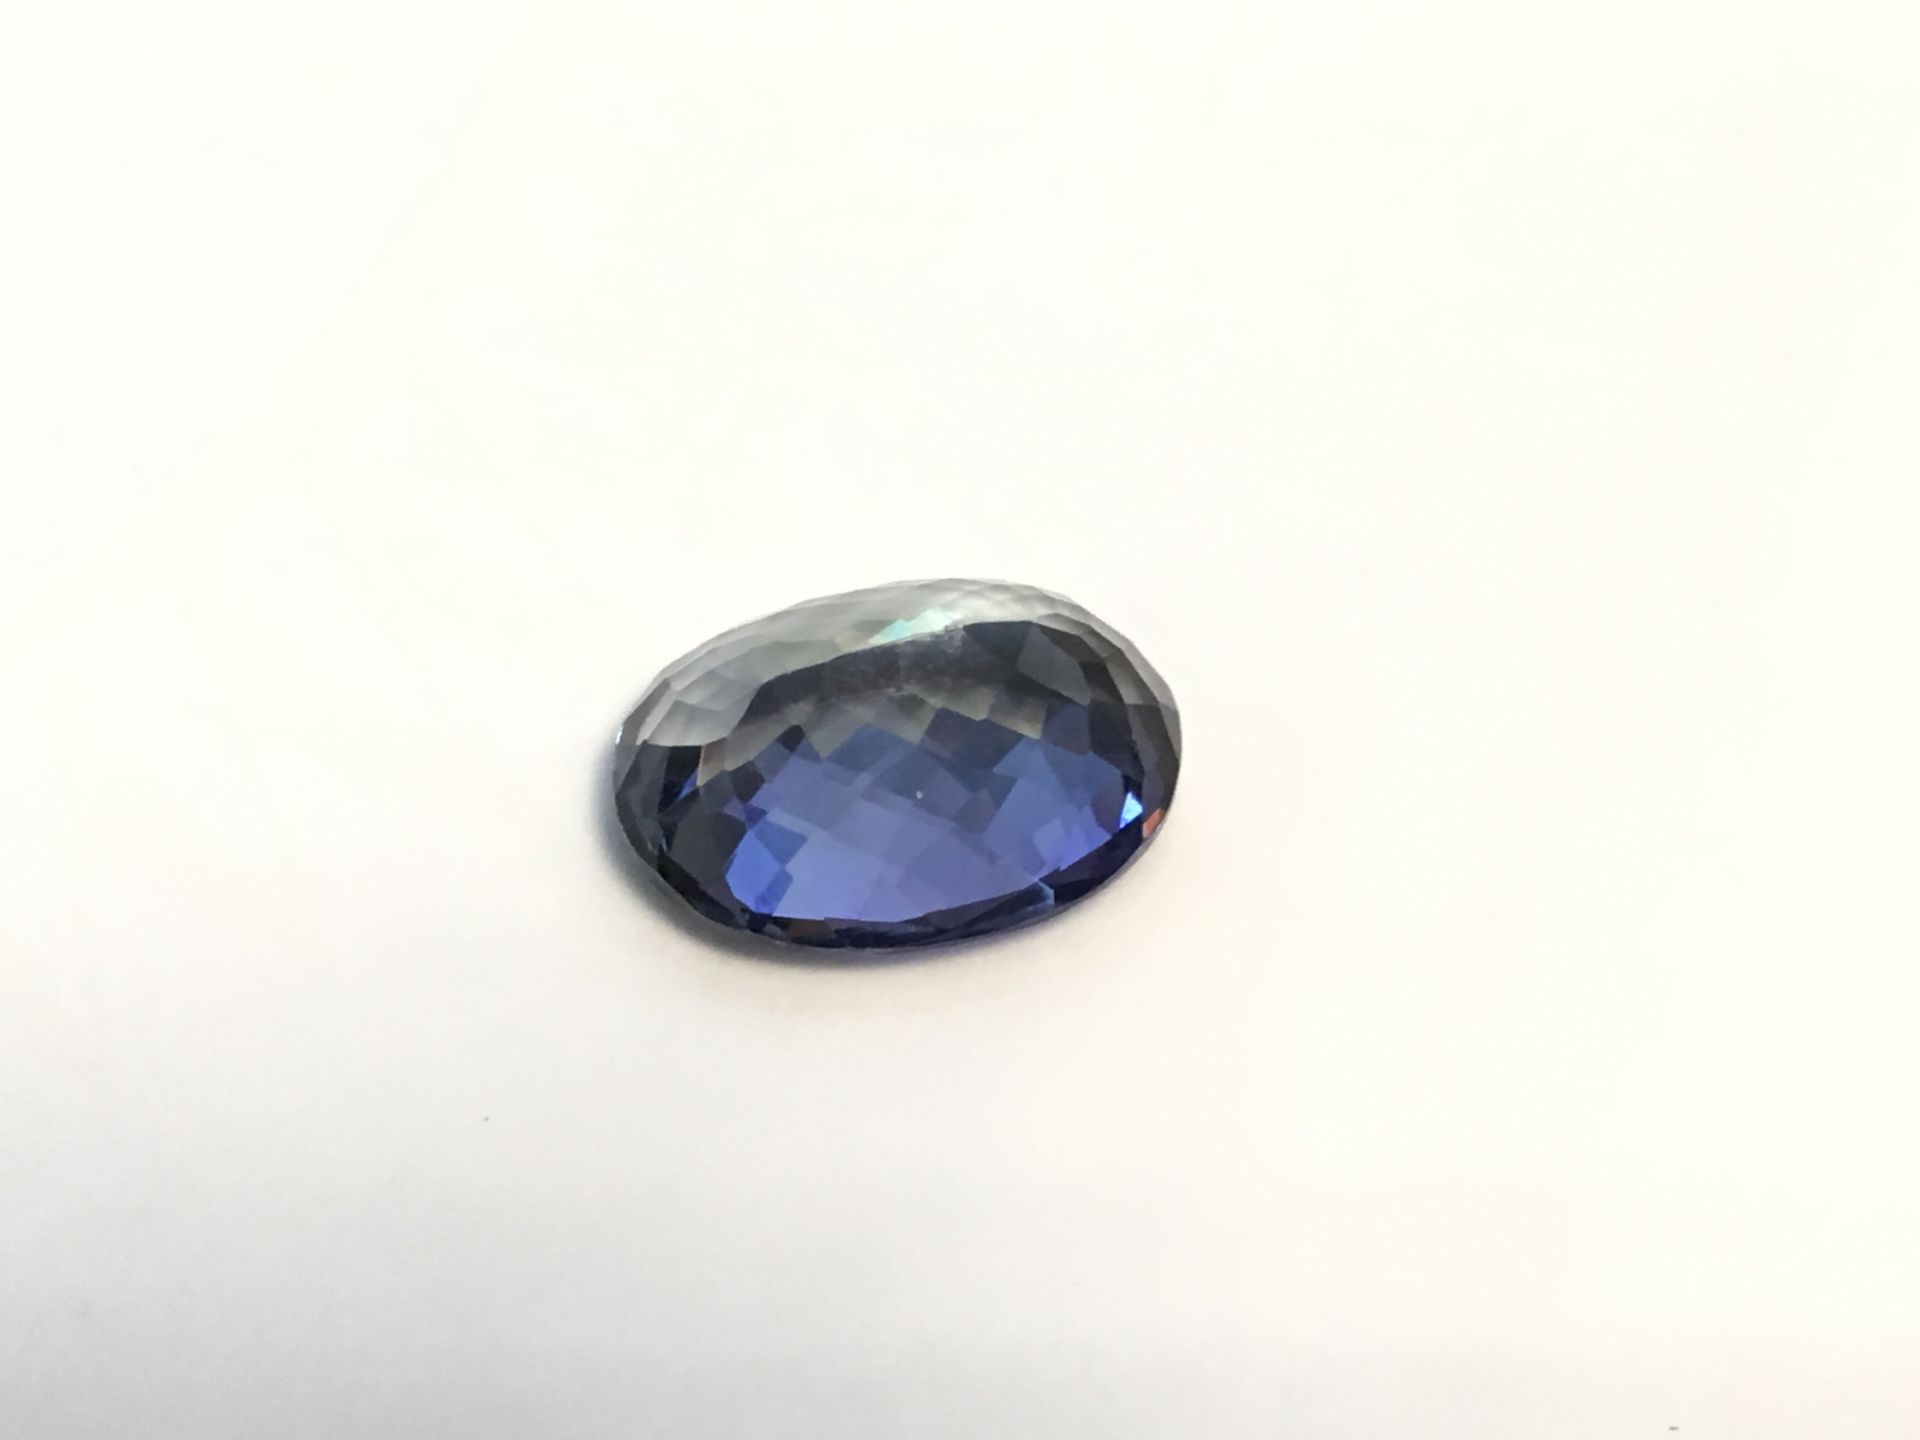 6.15ct Natural Tanzanite with GIA Certificate - Image 2 of 4